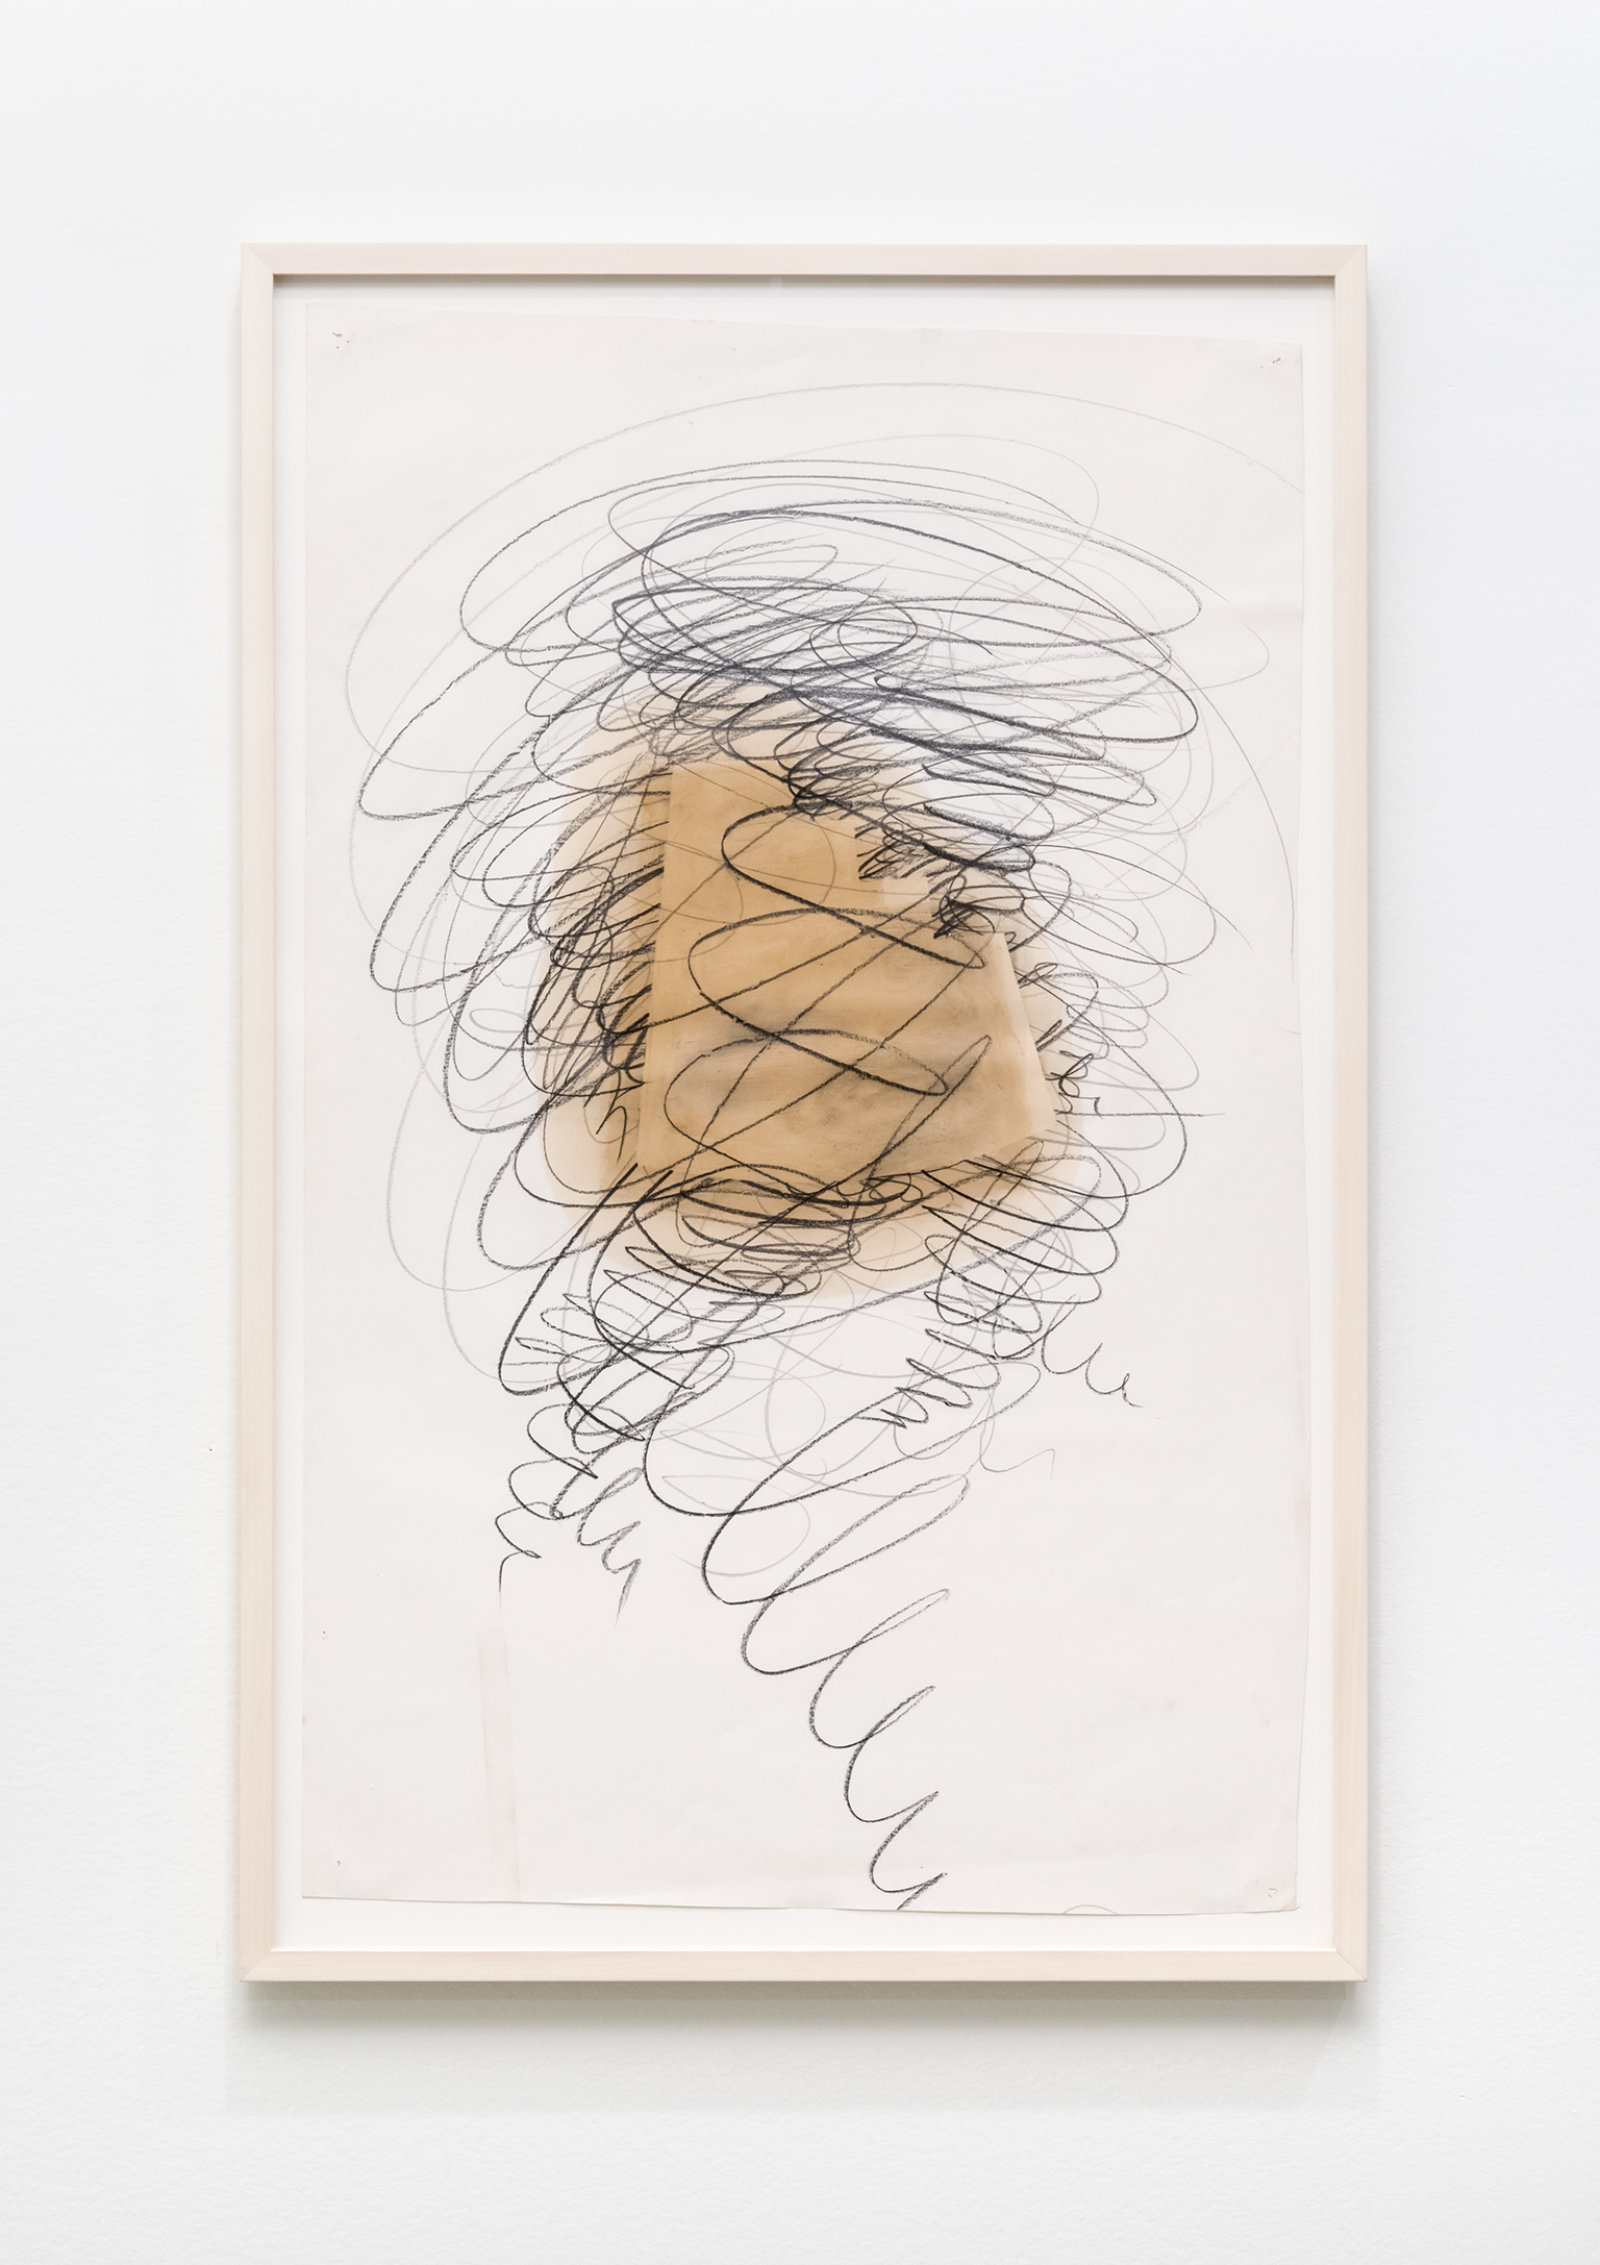 Jerry Pethick, Kuhn Shape I Vortex Studies Cable St., 1990, graphite, butter on paper, dimensions variable